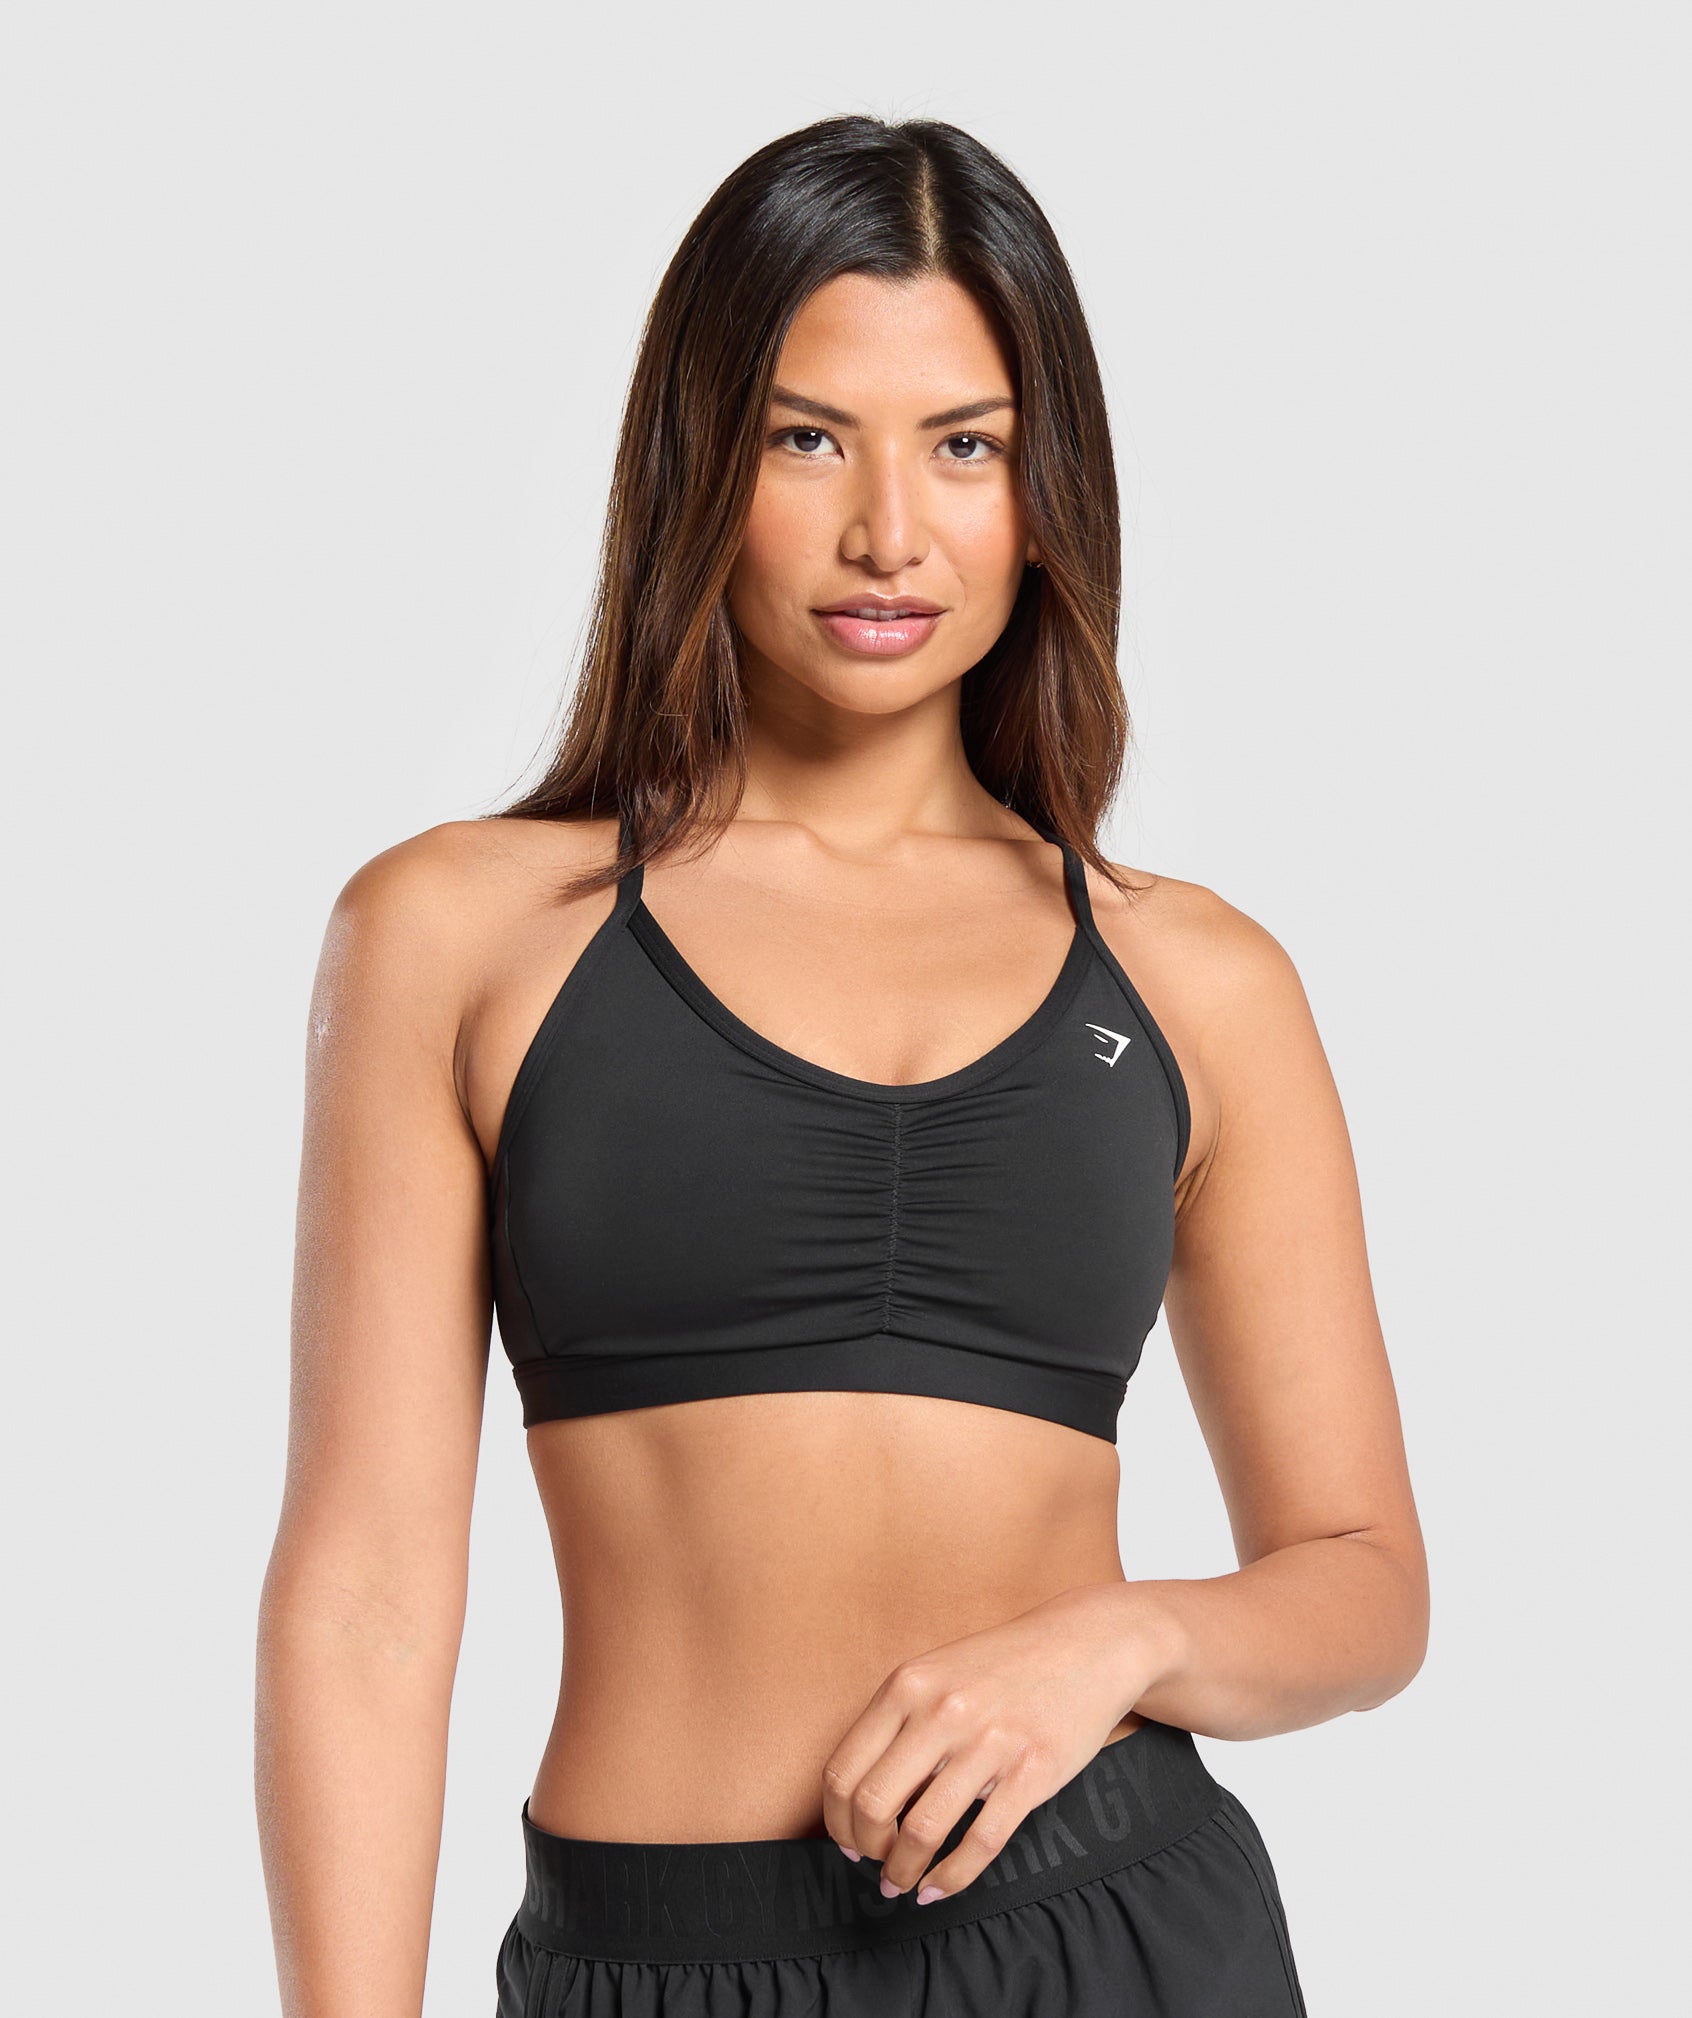 Ruched Sports Bra in Black is out of stock